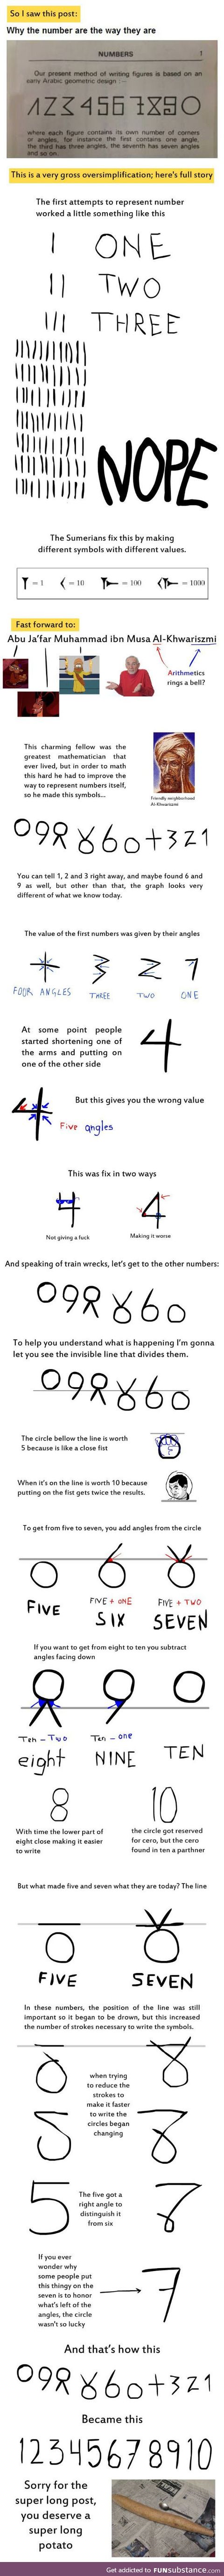 The invention of numbers today